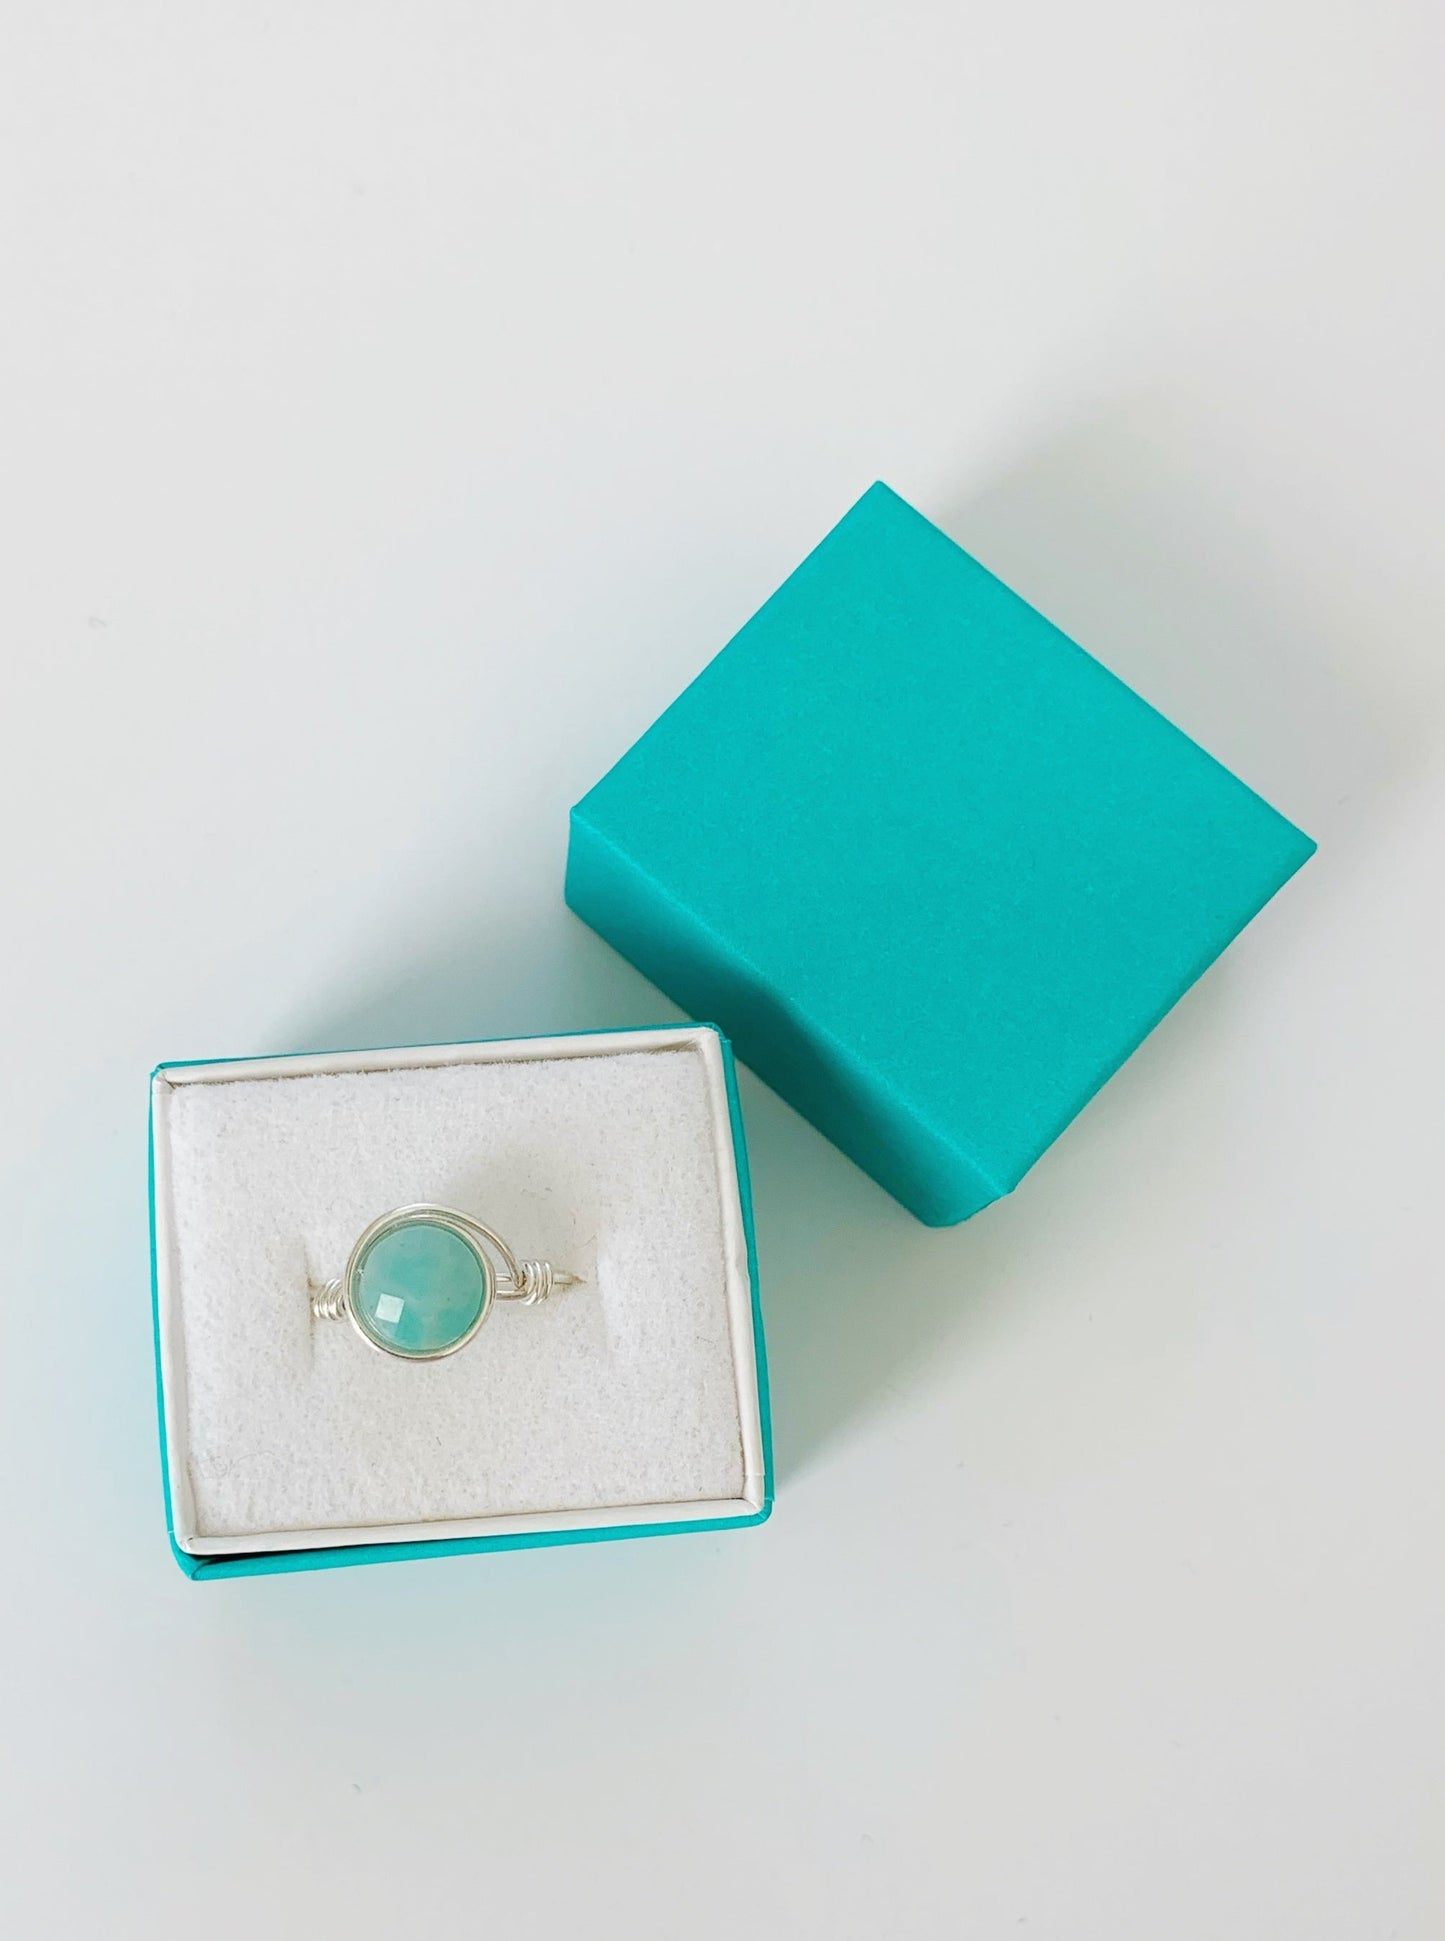 Mermaids and Madeleines Captiva sterling silver wire wrapped ring with amazonite gem at the center is photographed here in a teal gift box on a white surface